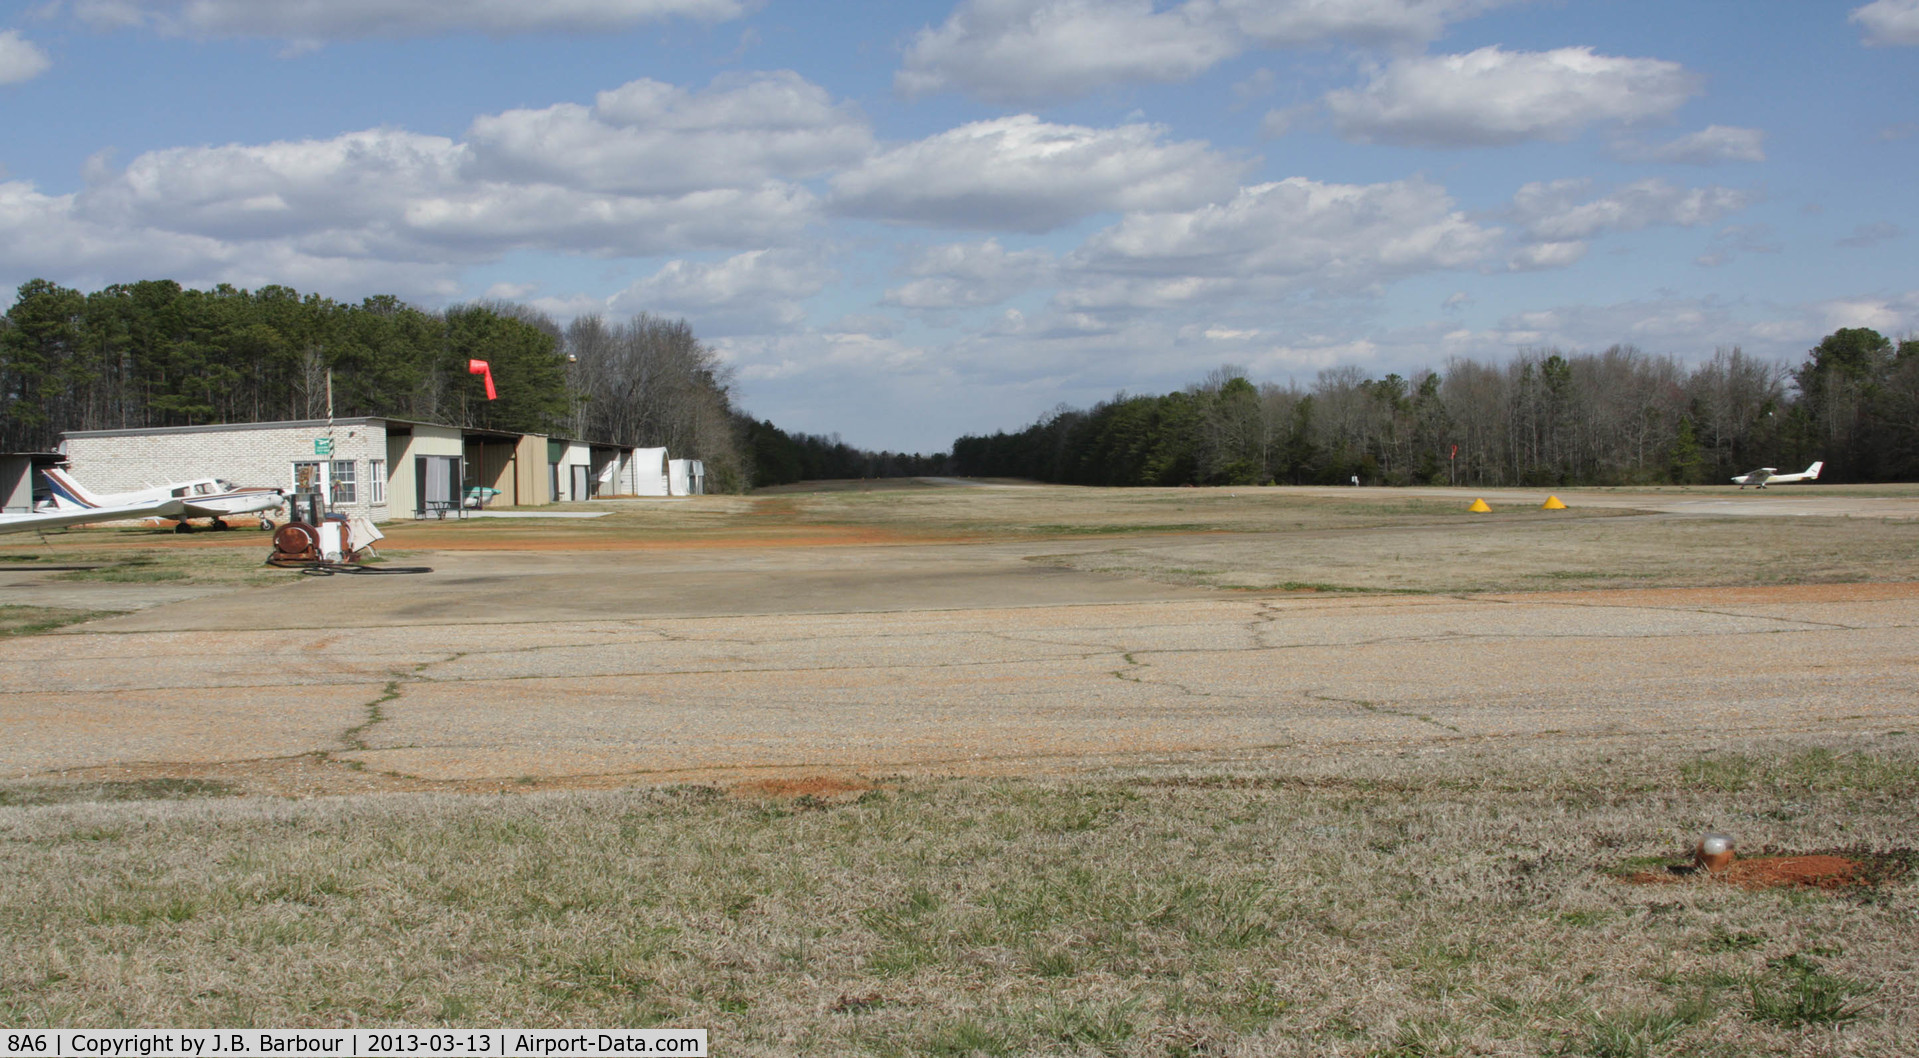 Wilgrove Air Park Airport (8A6) - Older airport with the Country charm